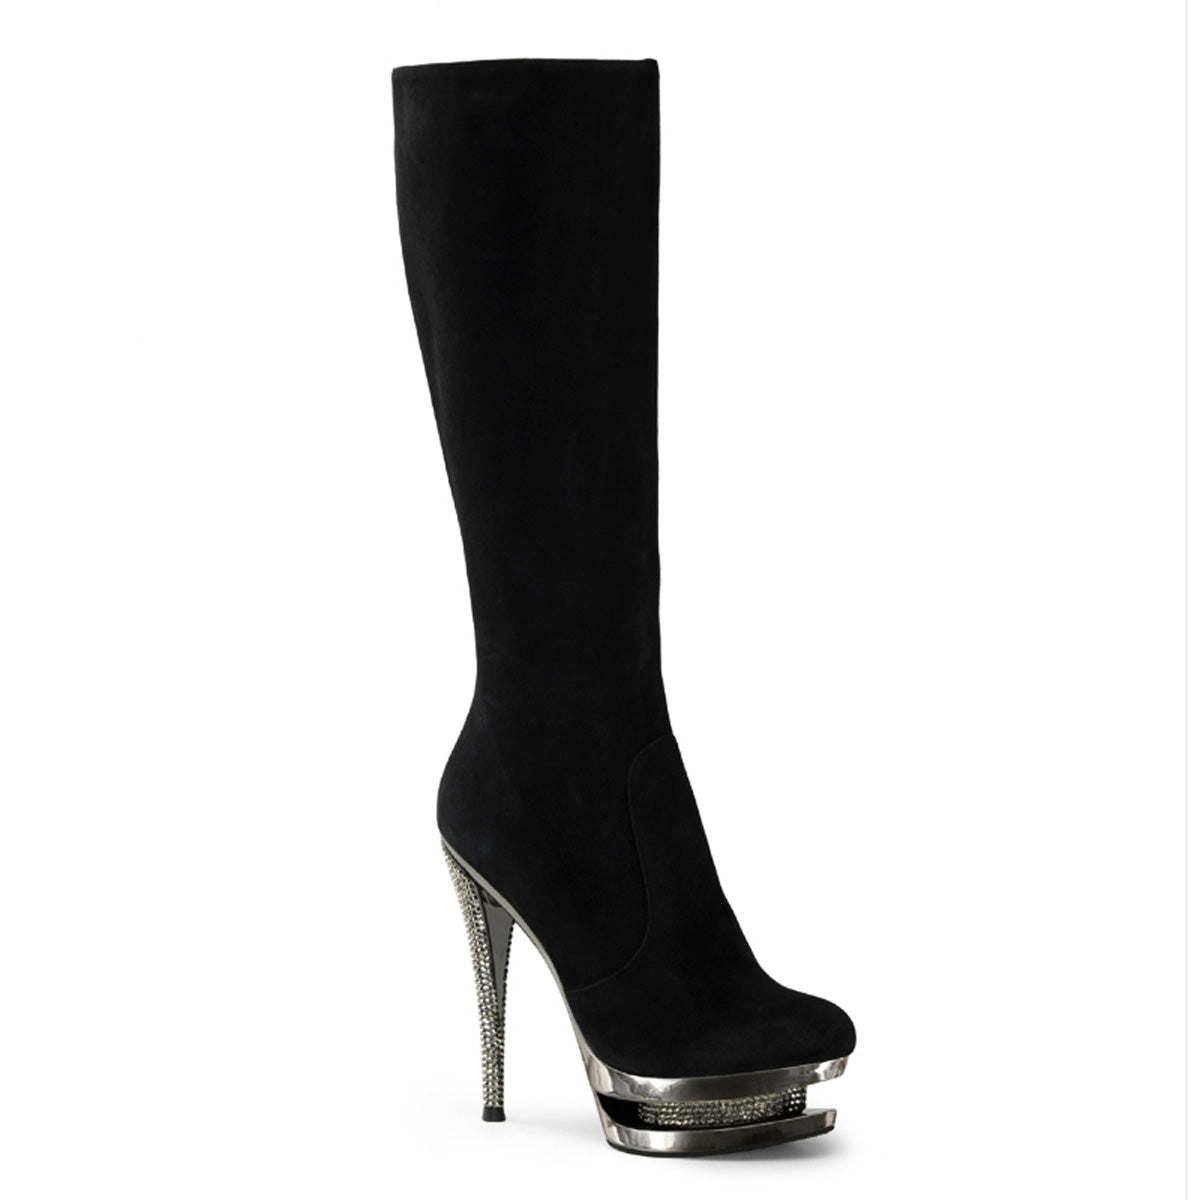 FASCINATE-2010 Black Suede/Pewter Chrome High Heel Thigh Boot